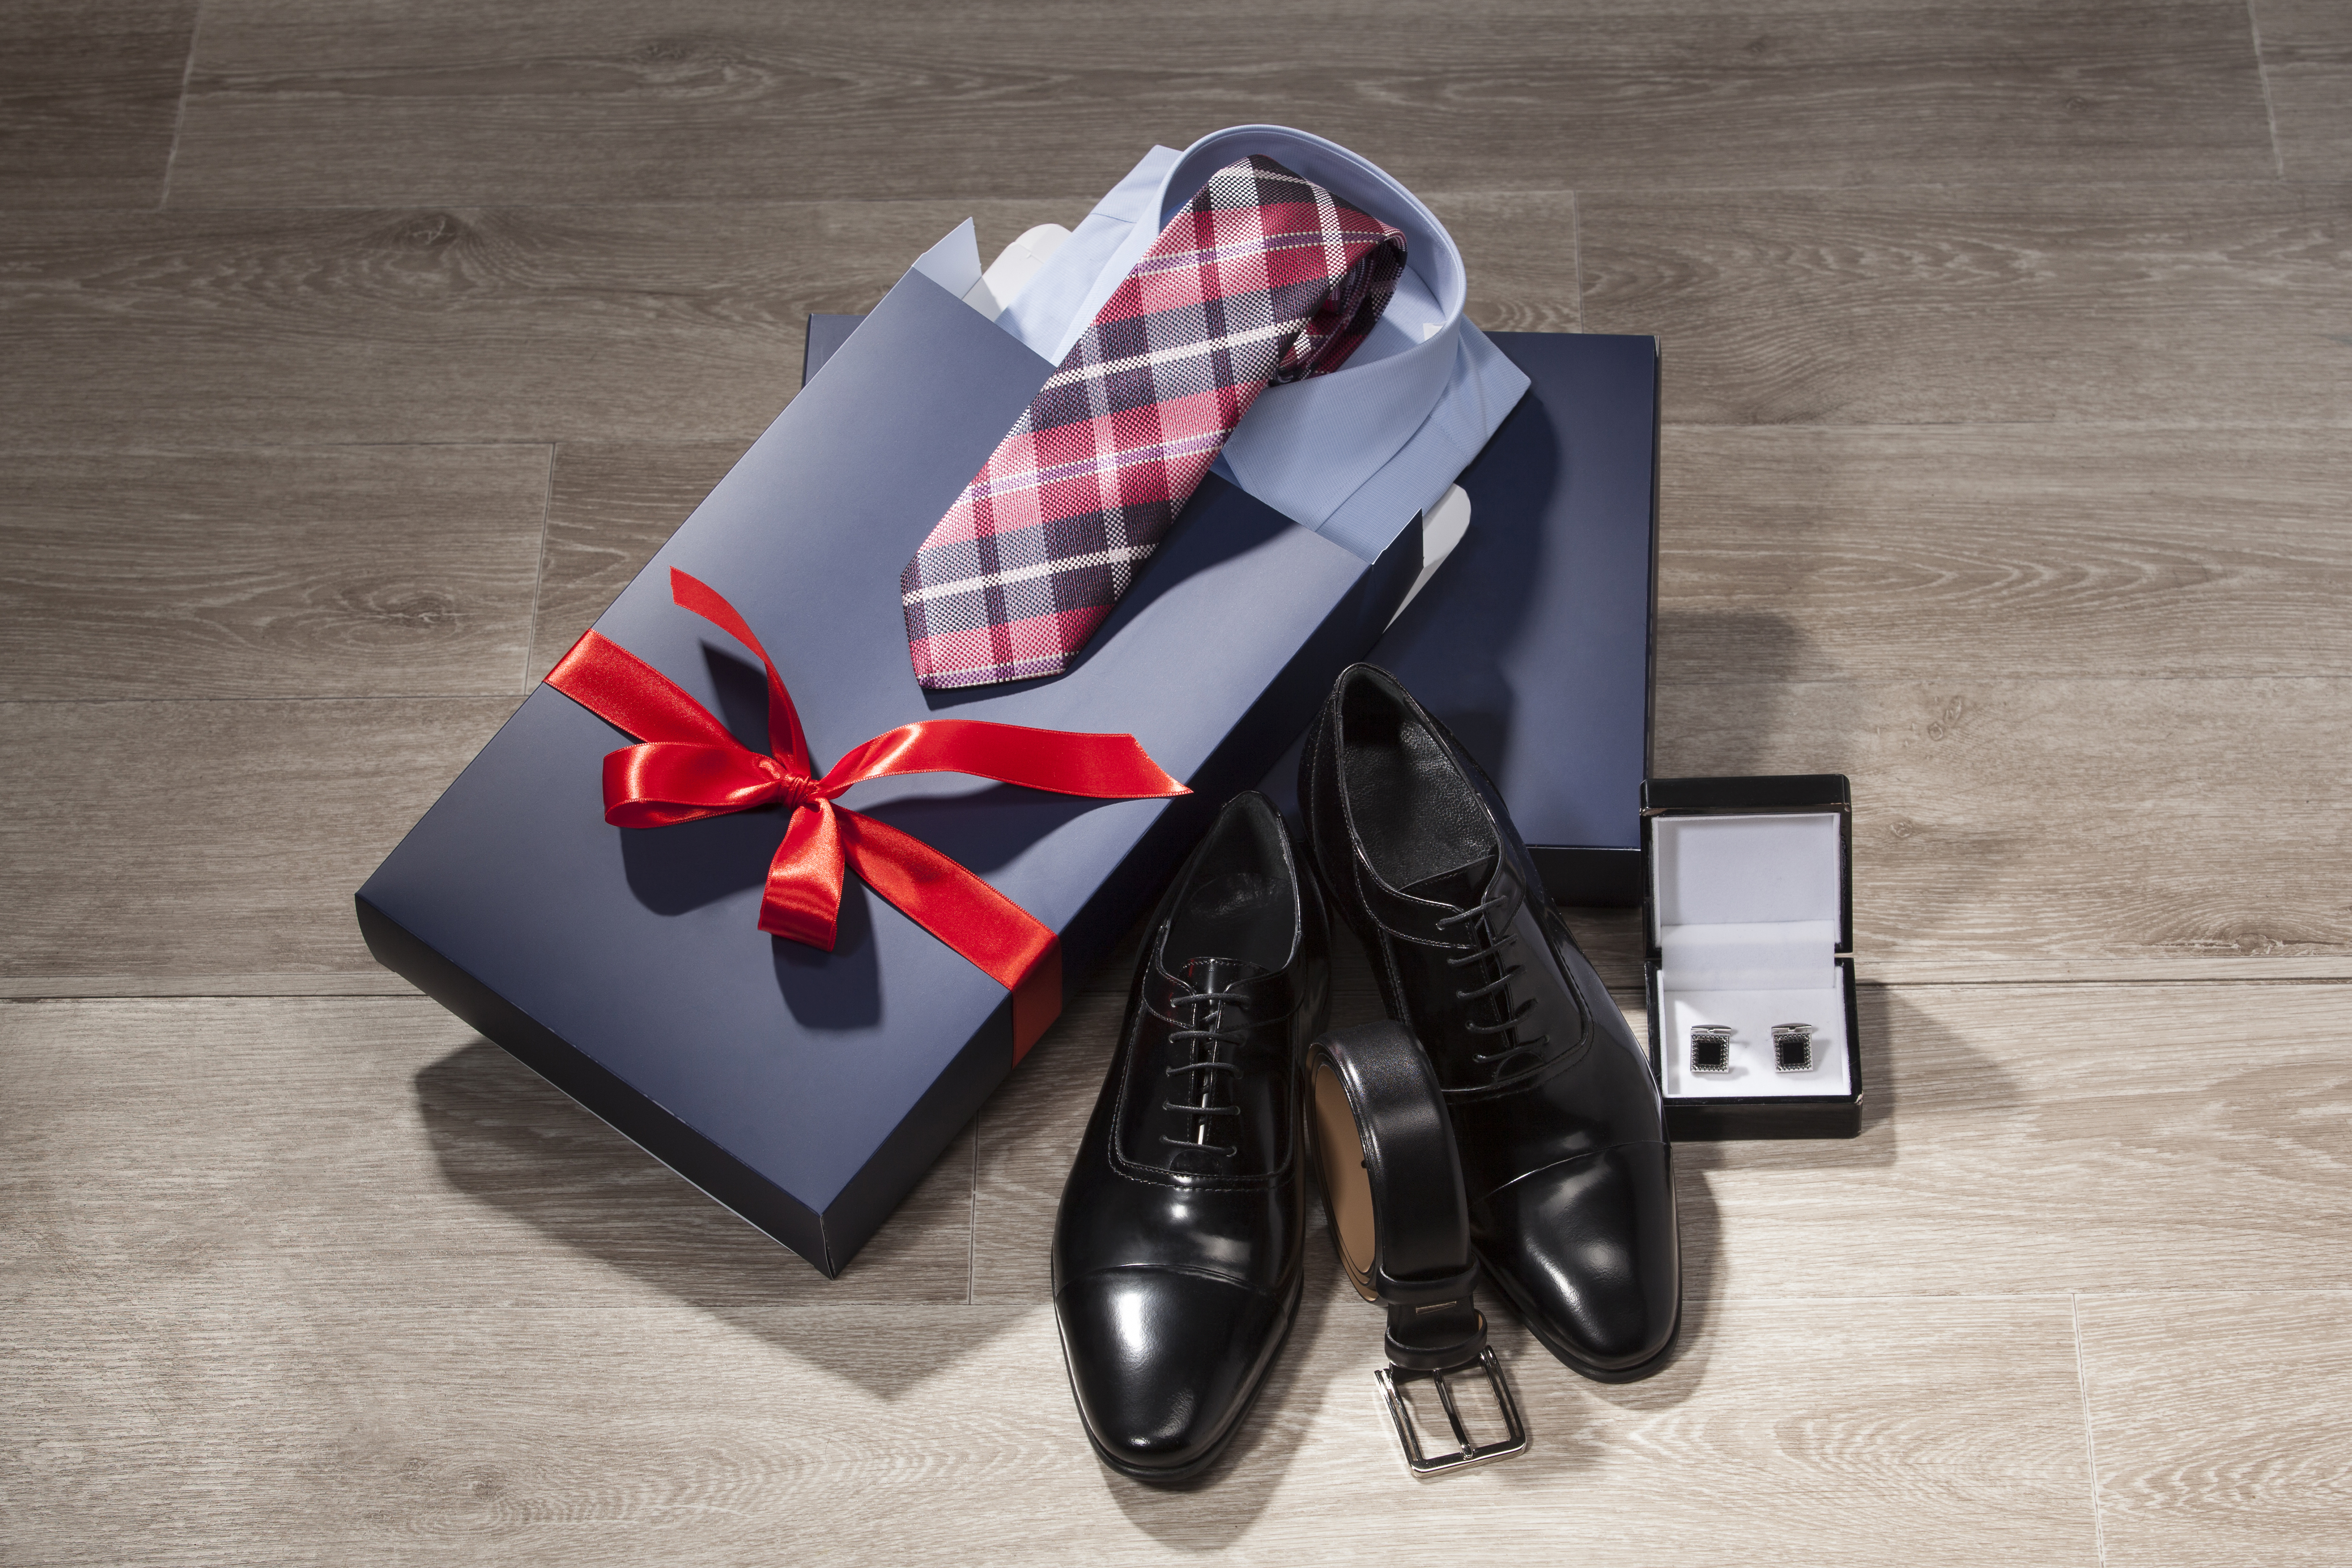 The Best 5 Senses Gift Ideas for Him, The Ultimate Man Gift